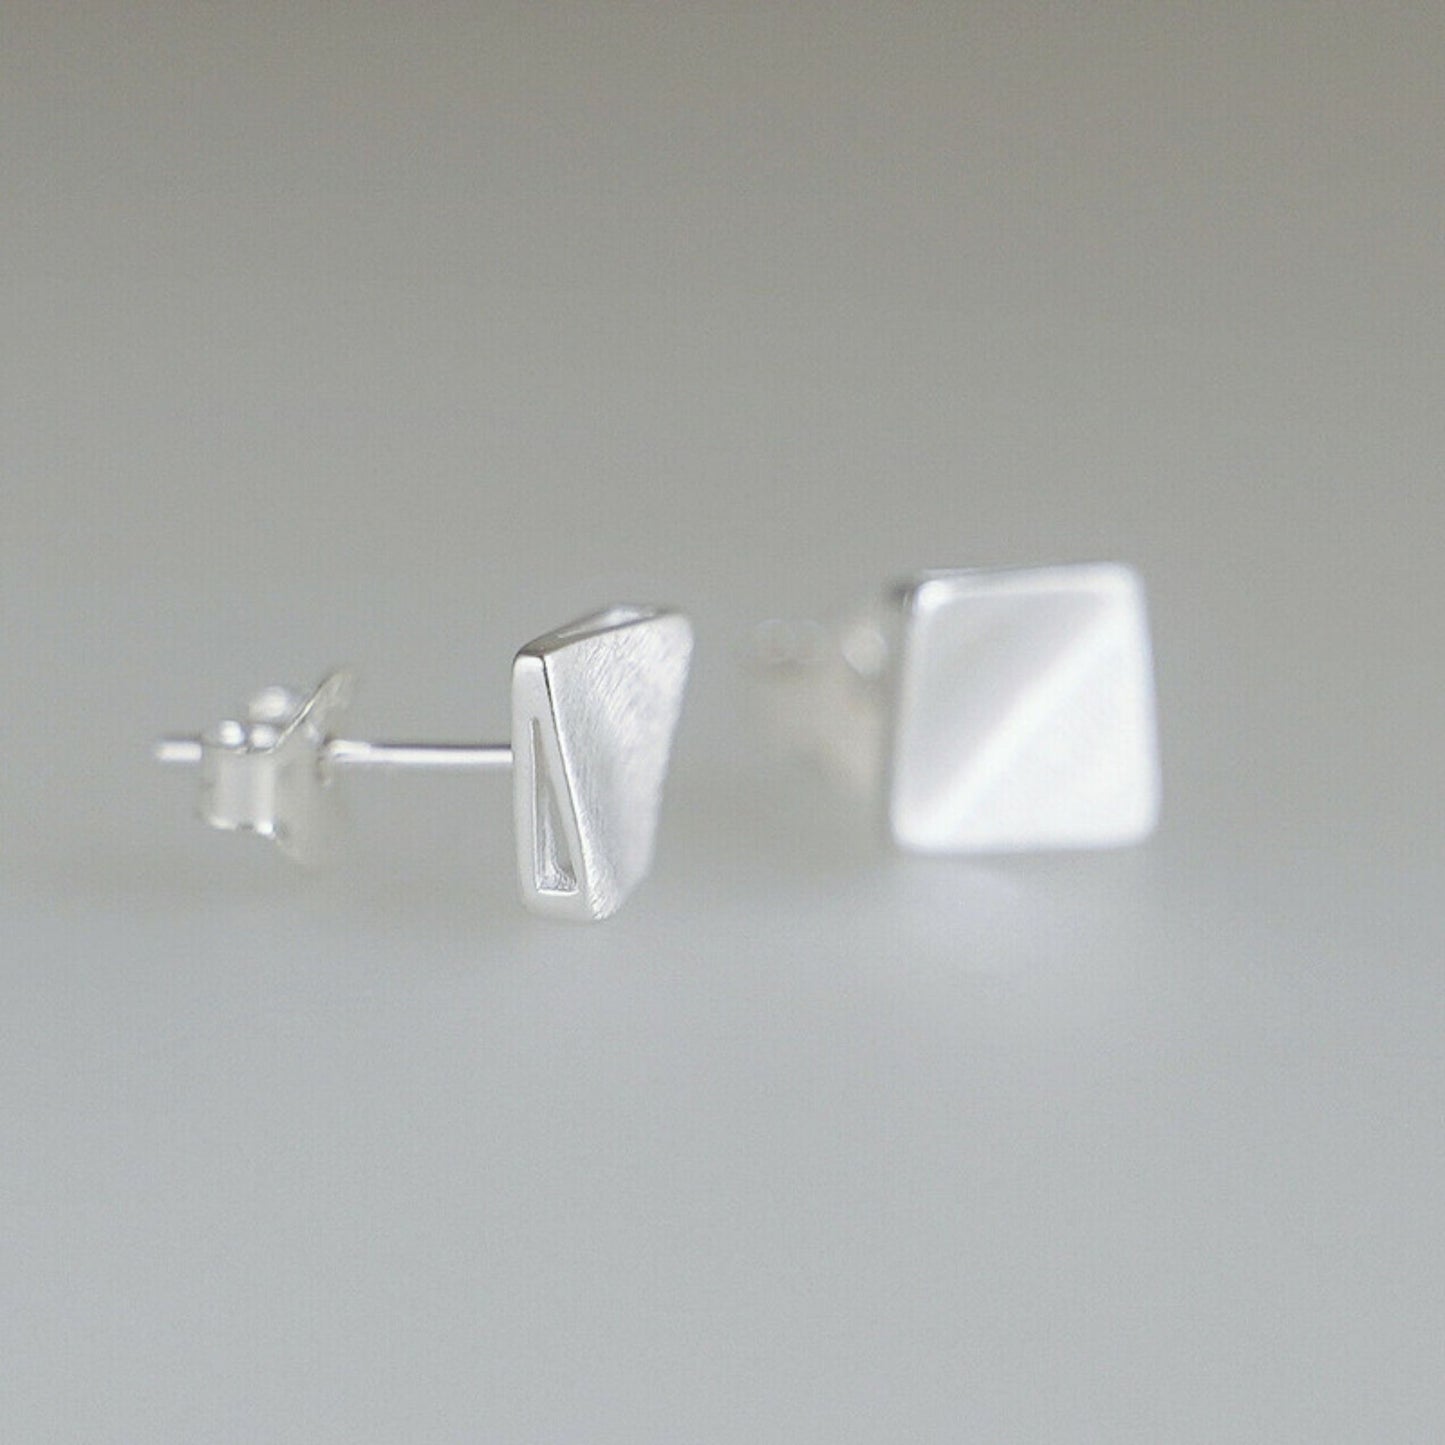 6mm Brushed Square Stud Earrings in 925 Sterling Silver with Bent Corners - sugarkittenlondon